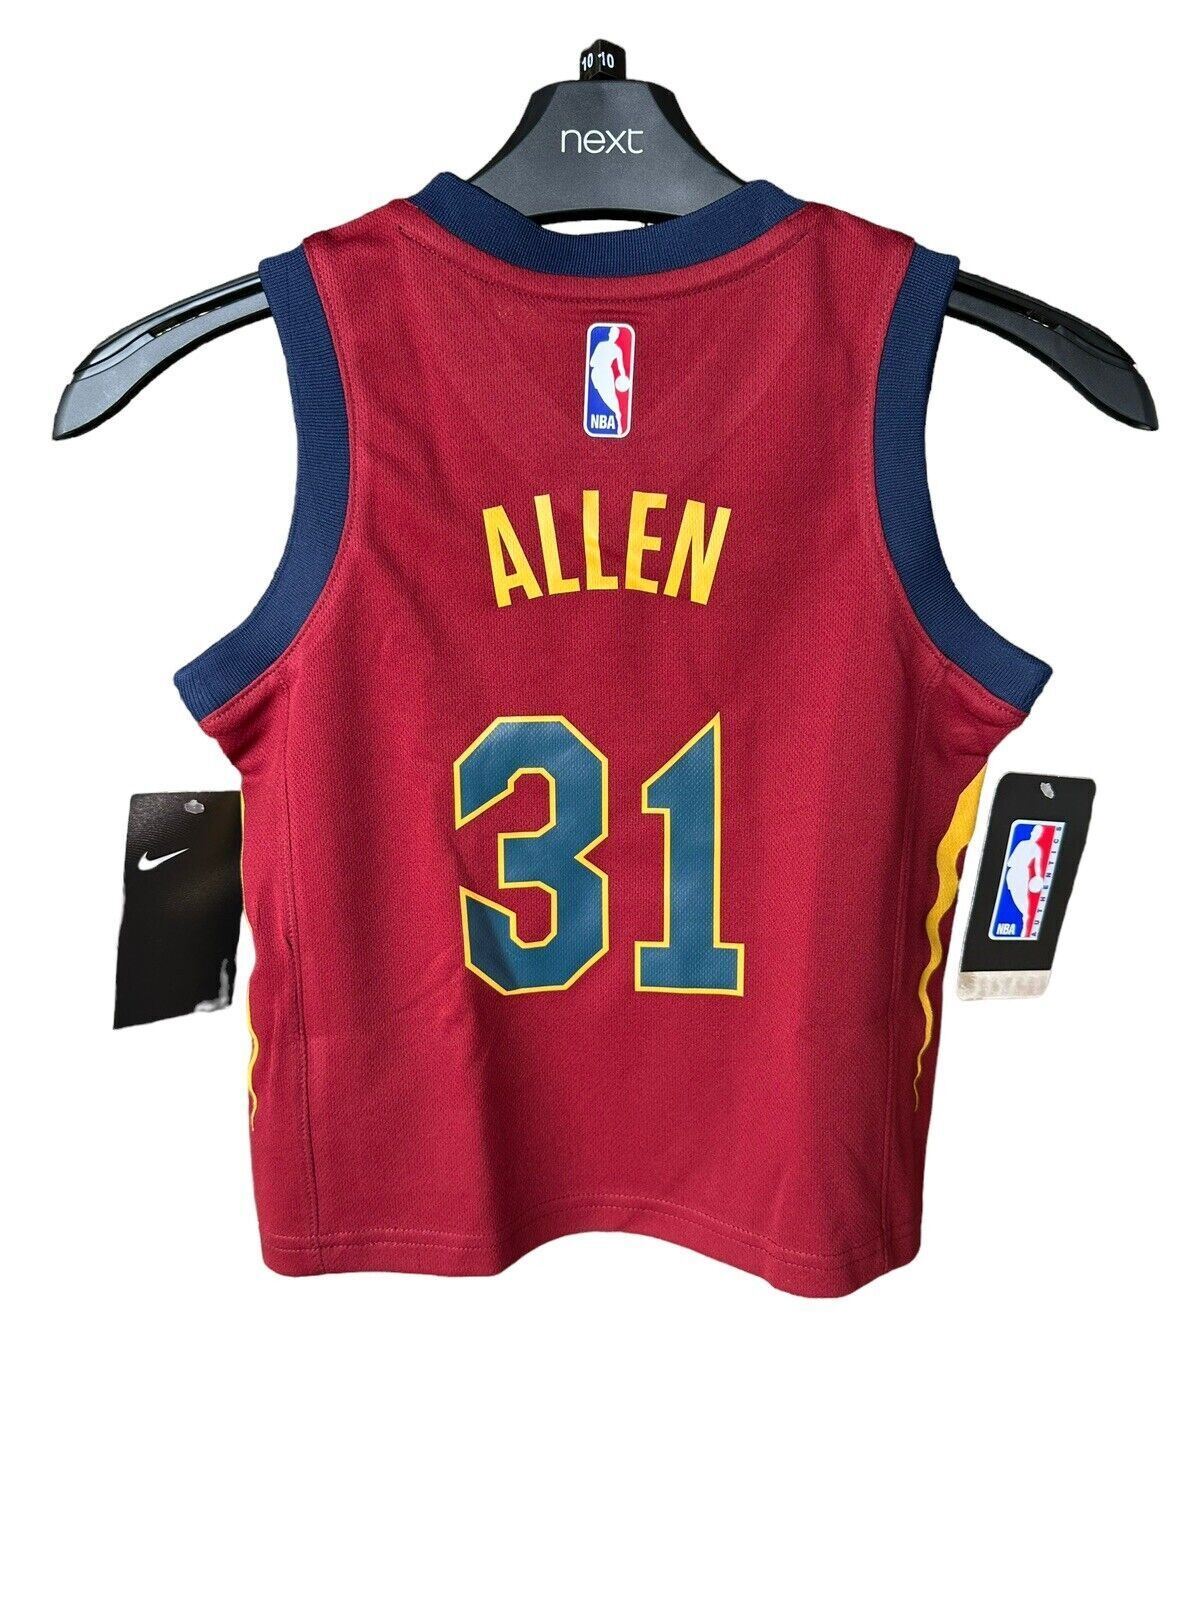 Nike NBA Cleveland Cavaliers Icon Edition Jersey Basketball Children’s Age 3-4Y